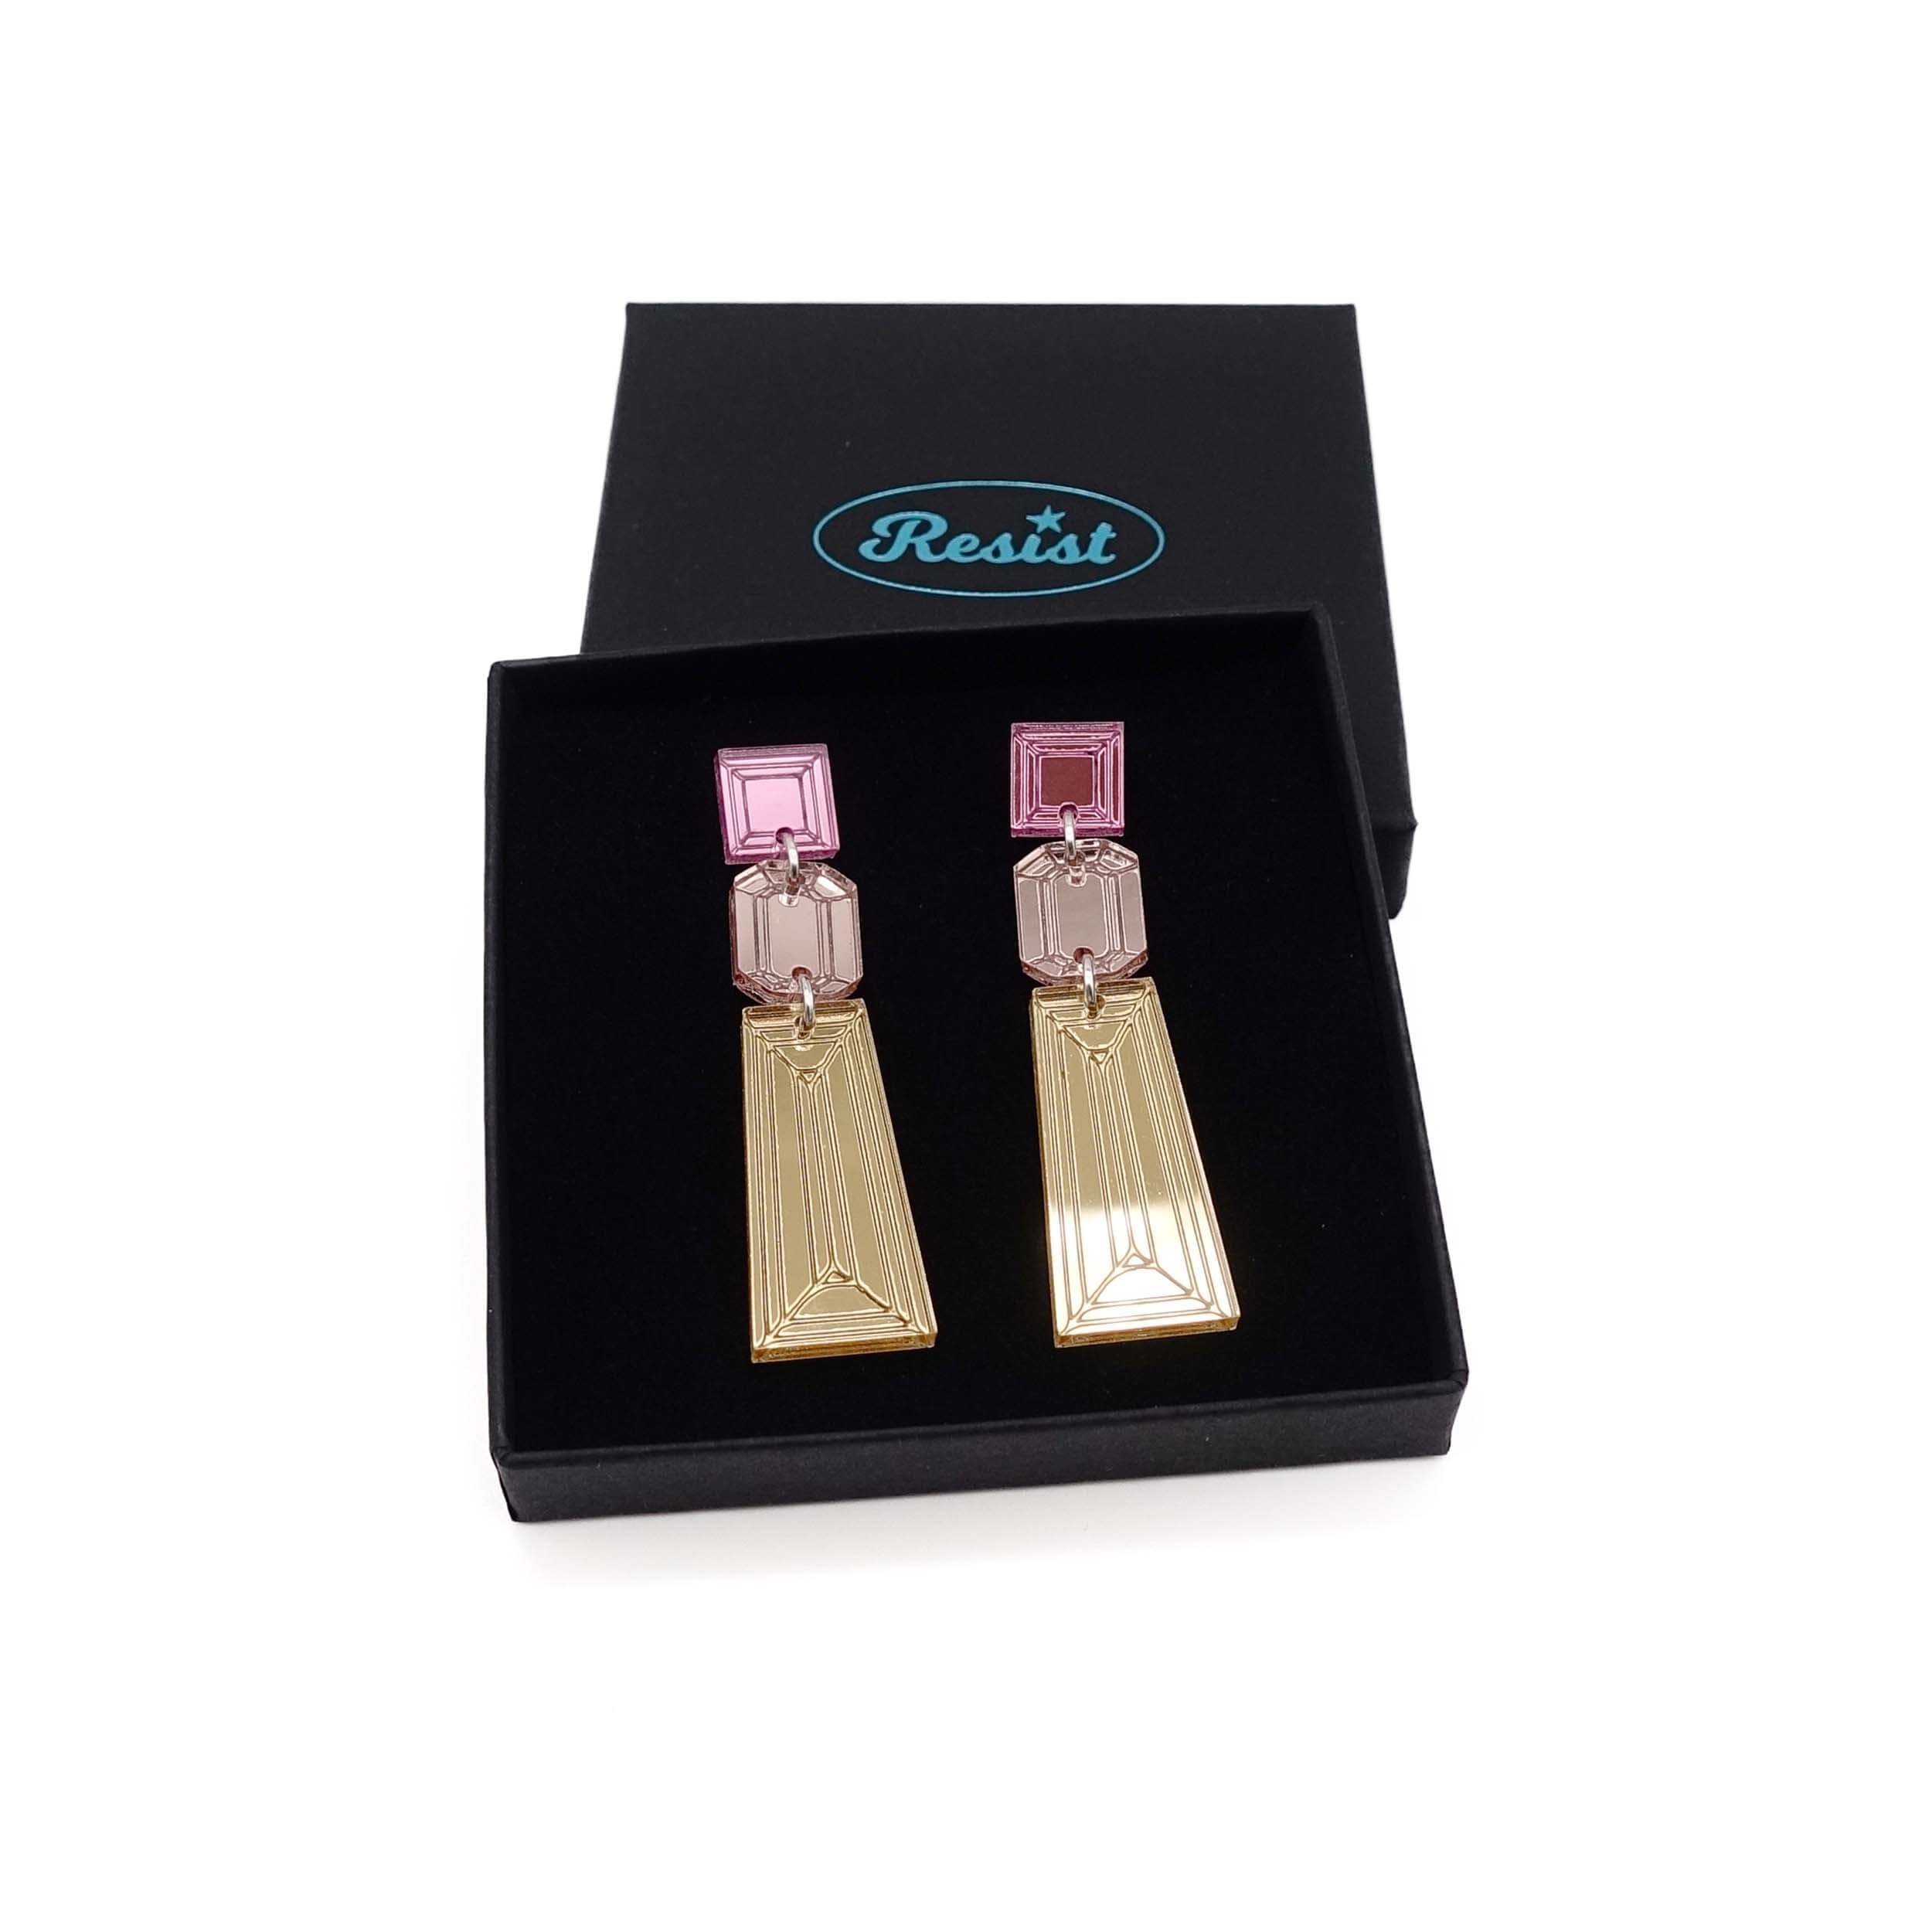 Long Deco drop earrings in gold, rose gold and pink mirror shown in a Wear and Resist gift box. 